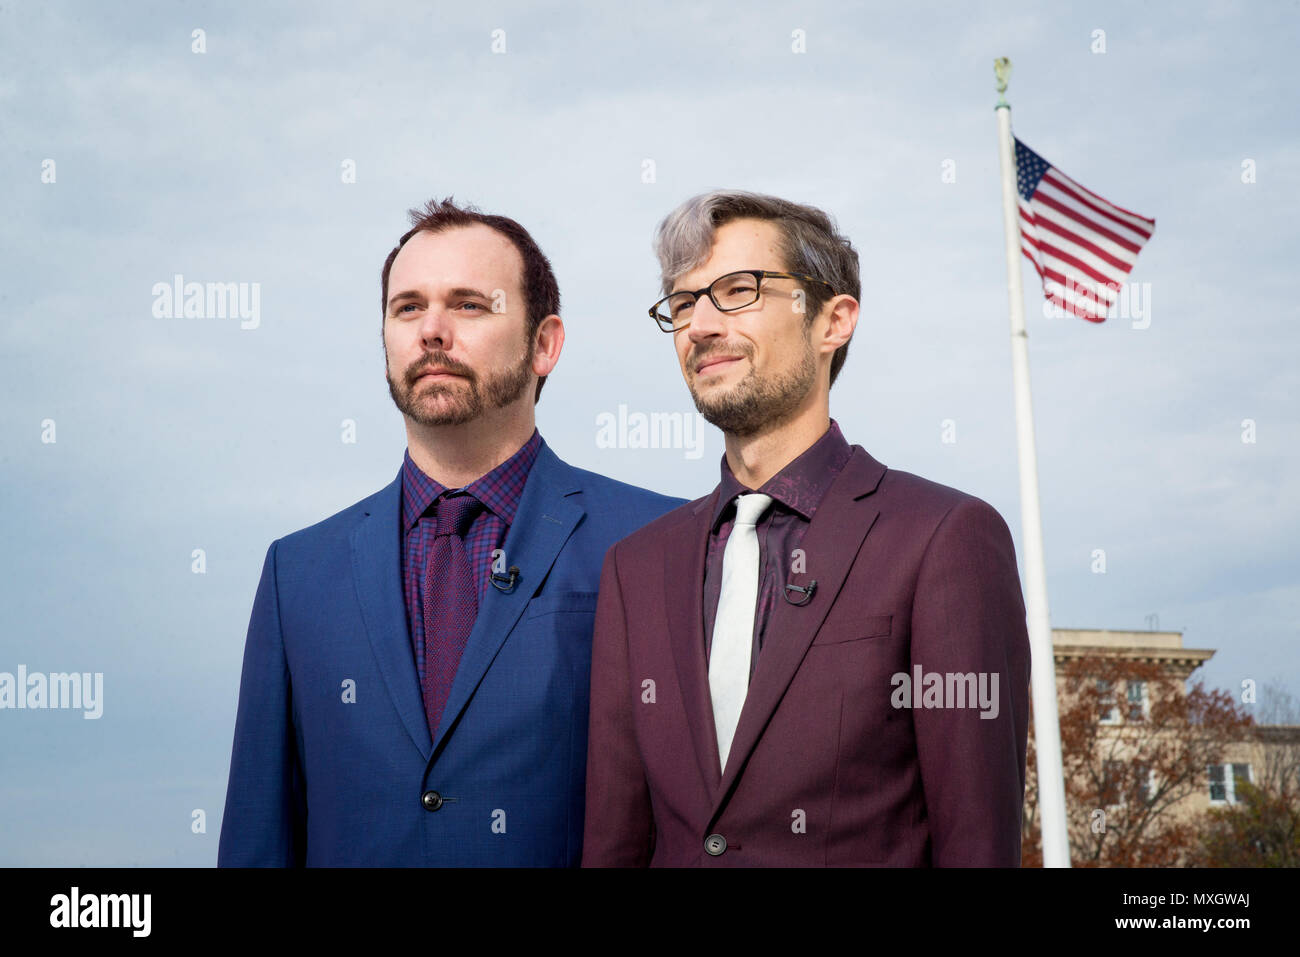 Washington, District of Columbia, USA. 5th Dec, 2017. CHARLIE CRAIG (L) and DAVID MULLINS stand outside the Supreme Court after oral arguments in Masterpiece Cakeshop v. Colorado Civil Rights Commission. The court ruled in favor of the baker who denied custom wedding cake work for Craig and Mullins. Credit: Erin Scott/ZUMA Wire/Alamy Live News Stock Photo